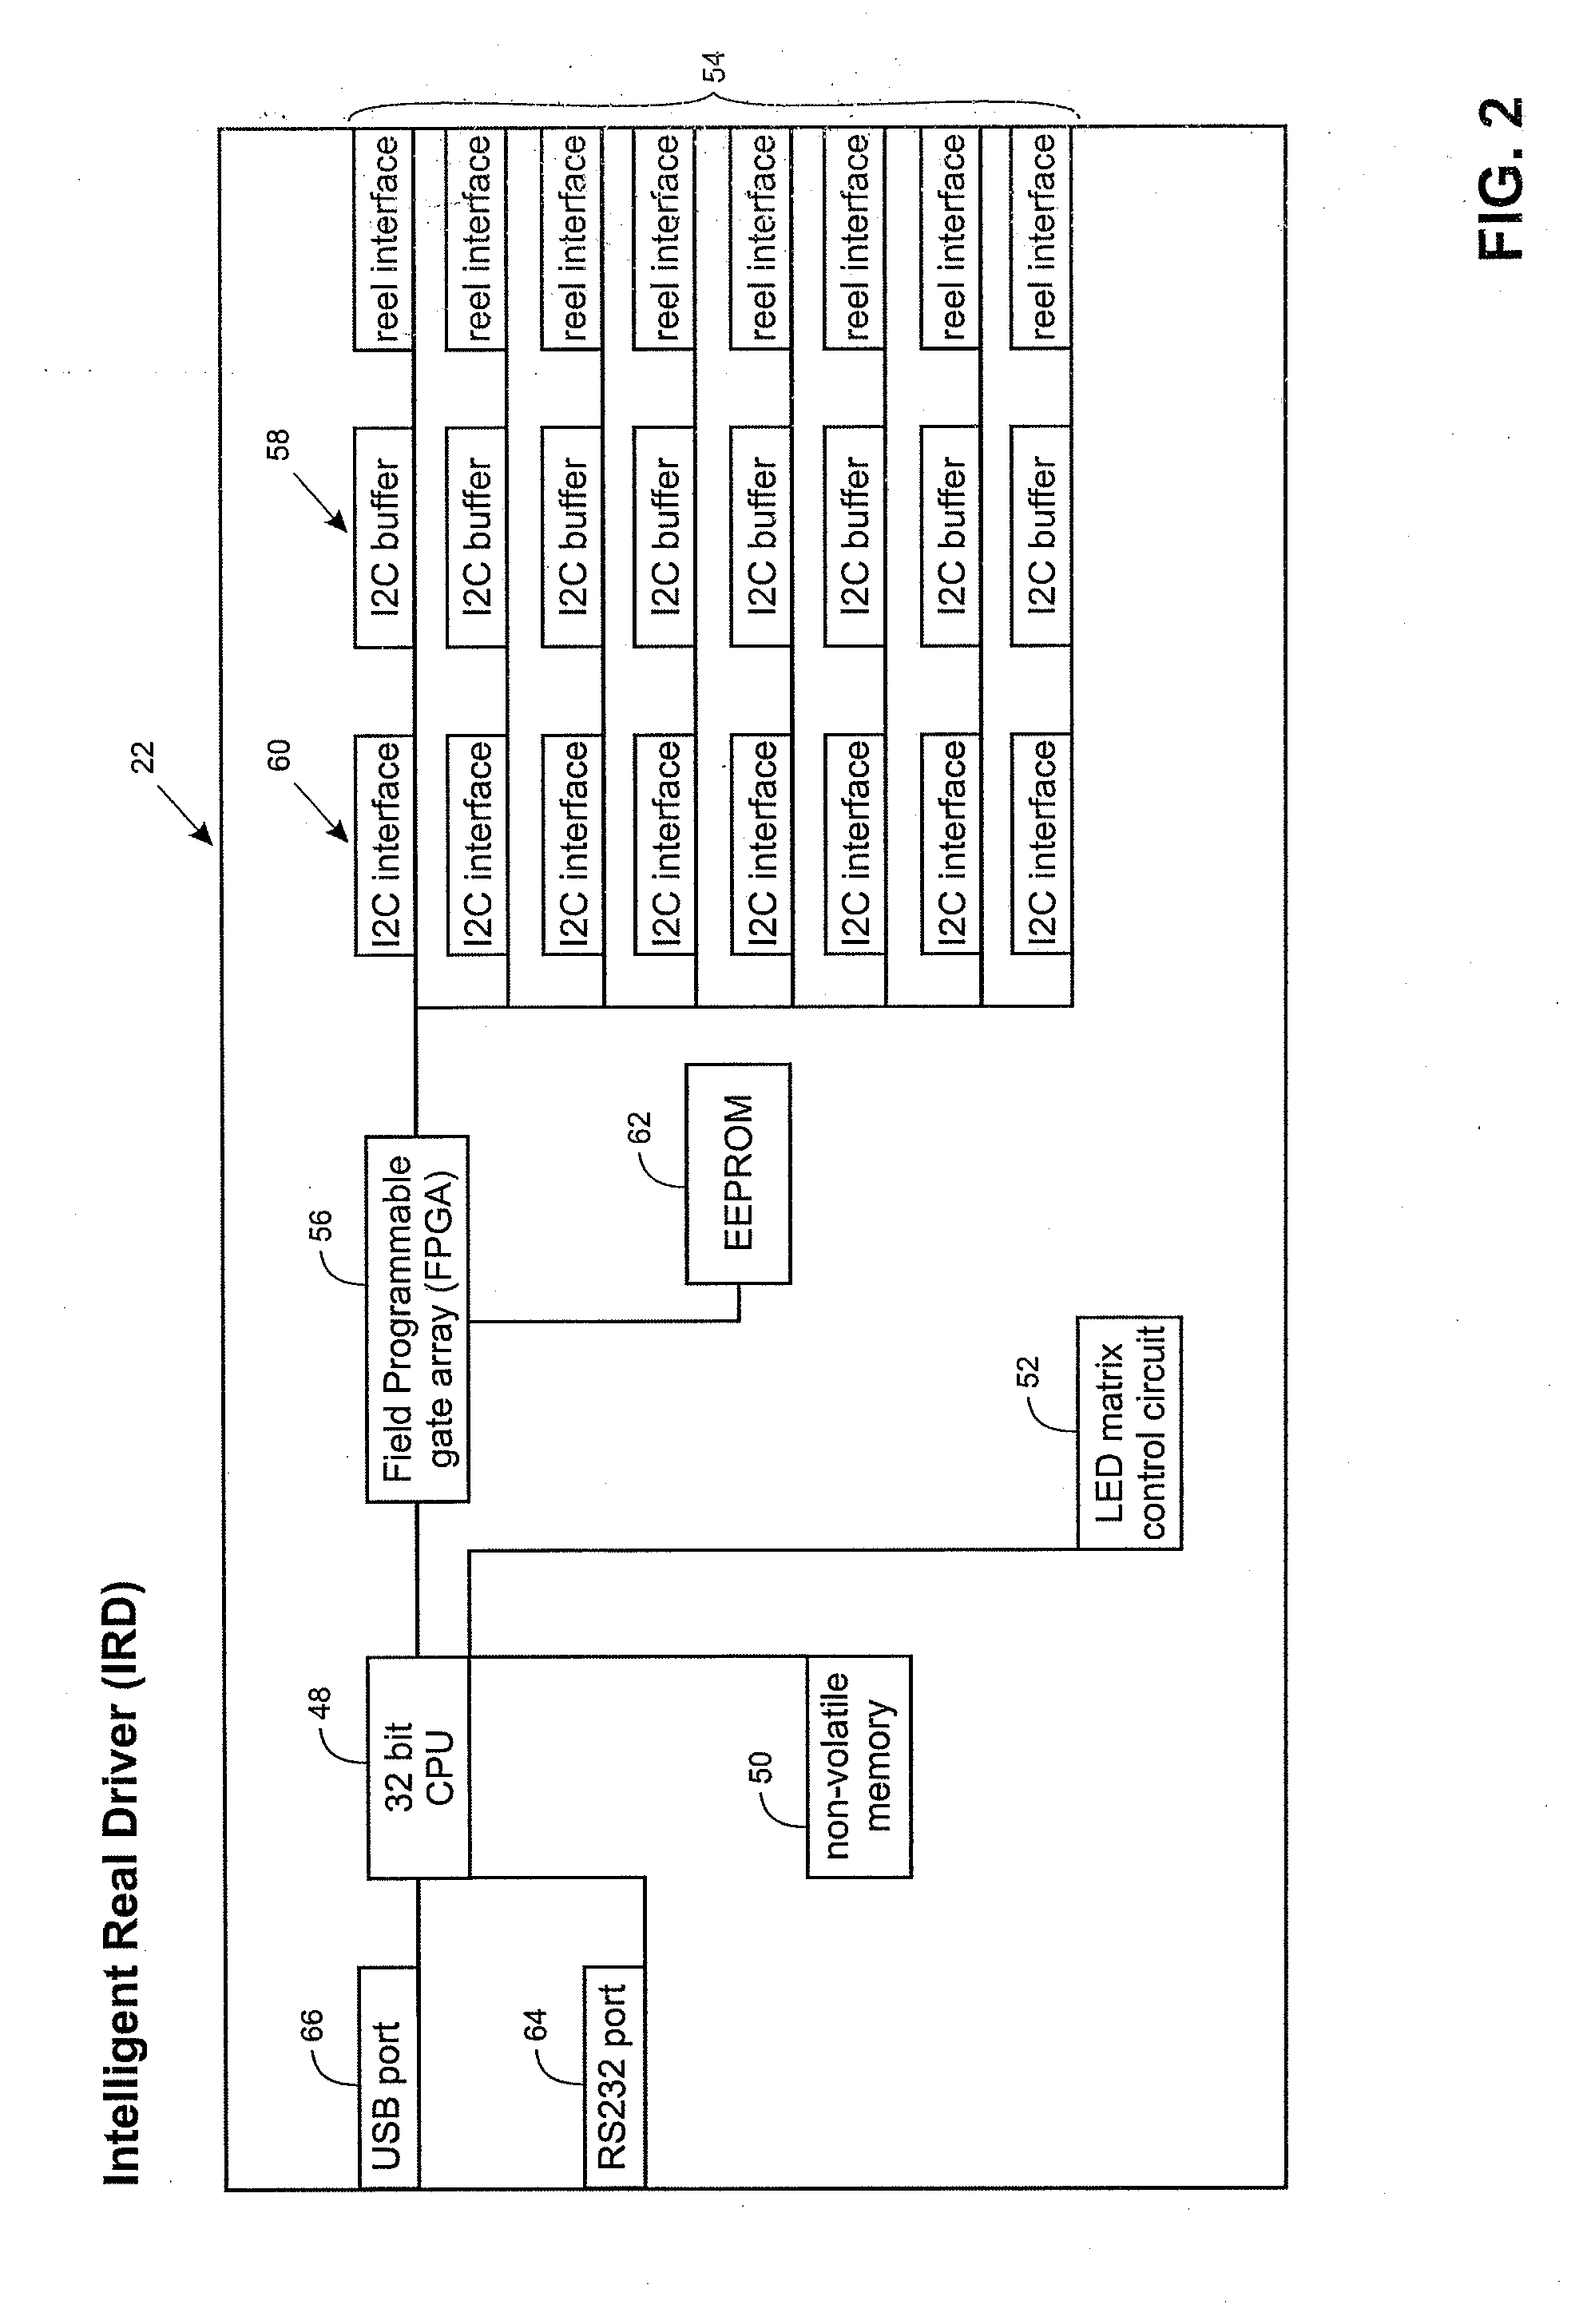 Control system for reel mechanism